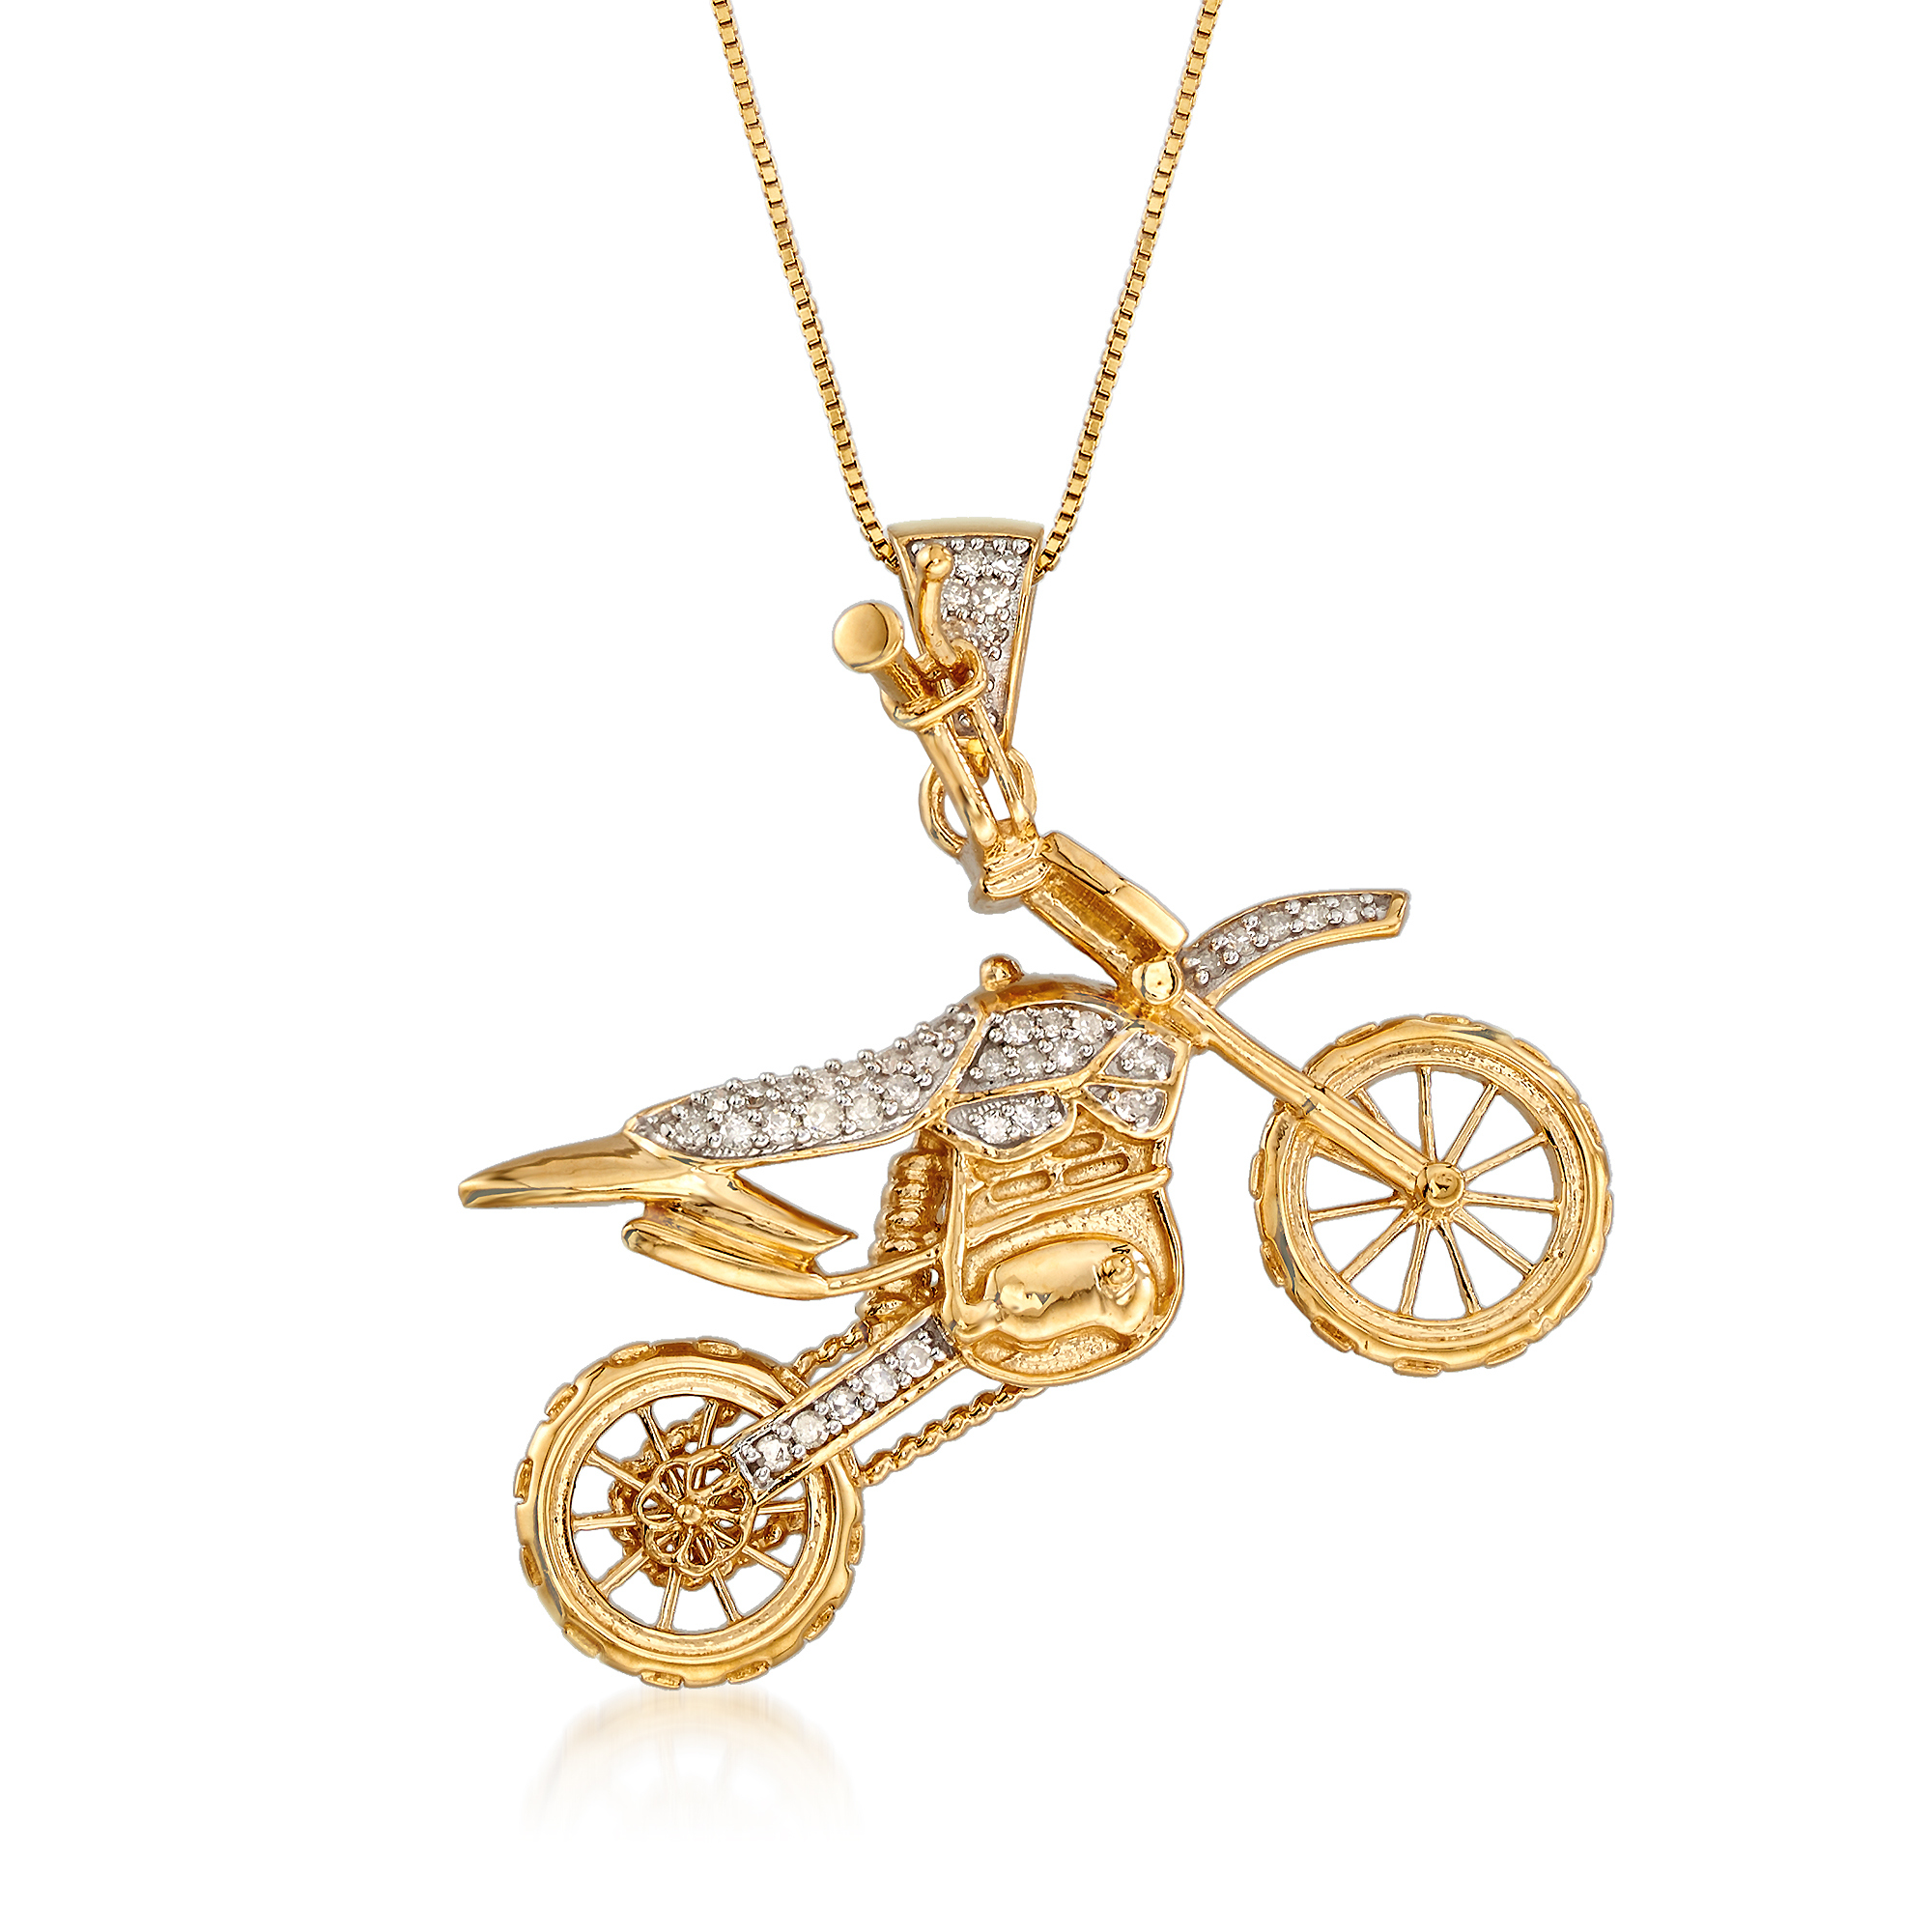 Cycle MOTORCYCLE PENDANT Necklace Jewelry - DETAILED CYCLE Off Road Dirt  Bike | eBay